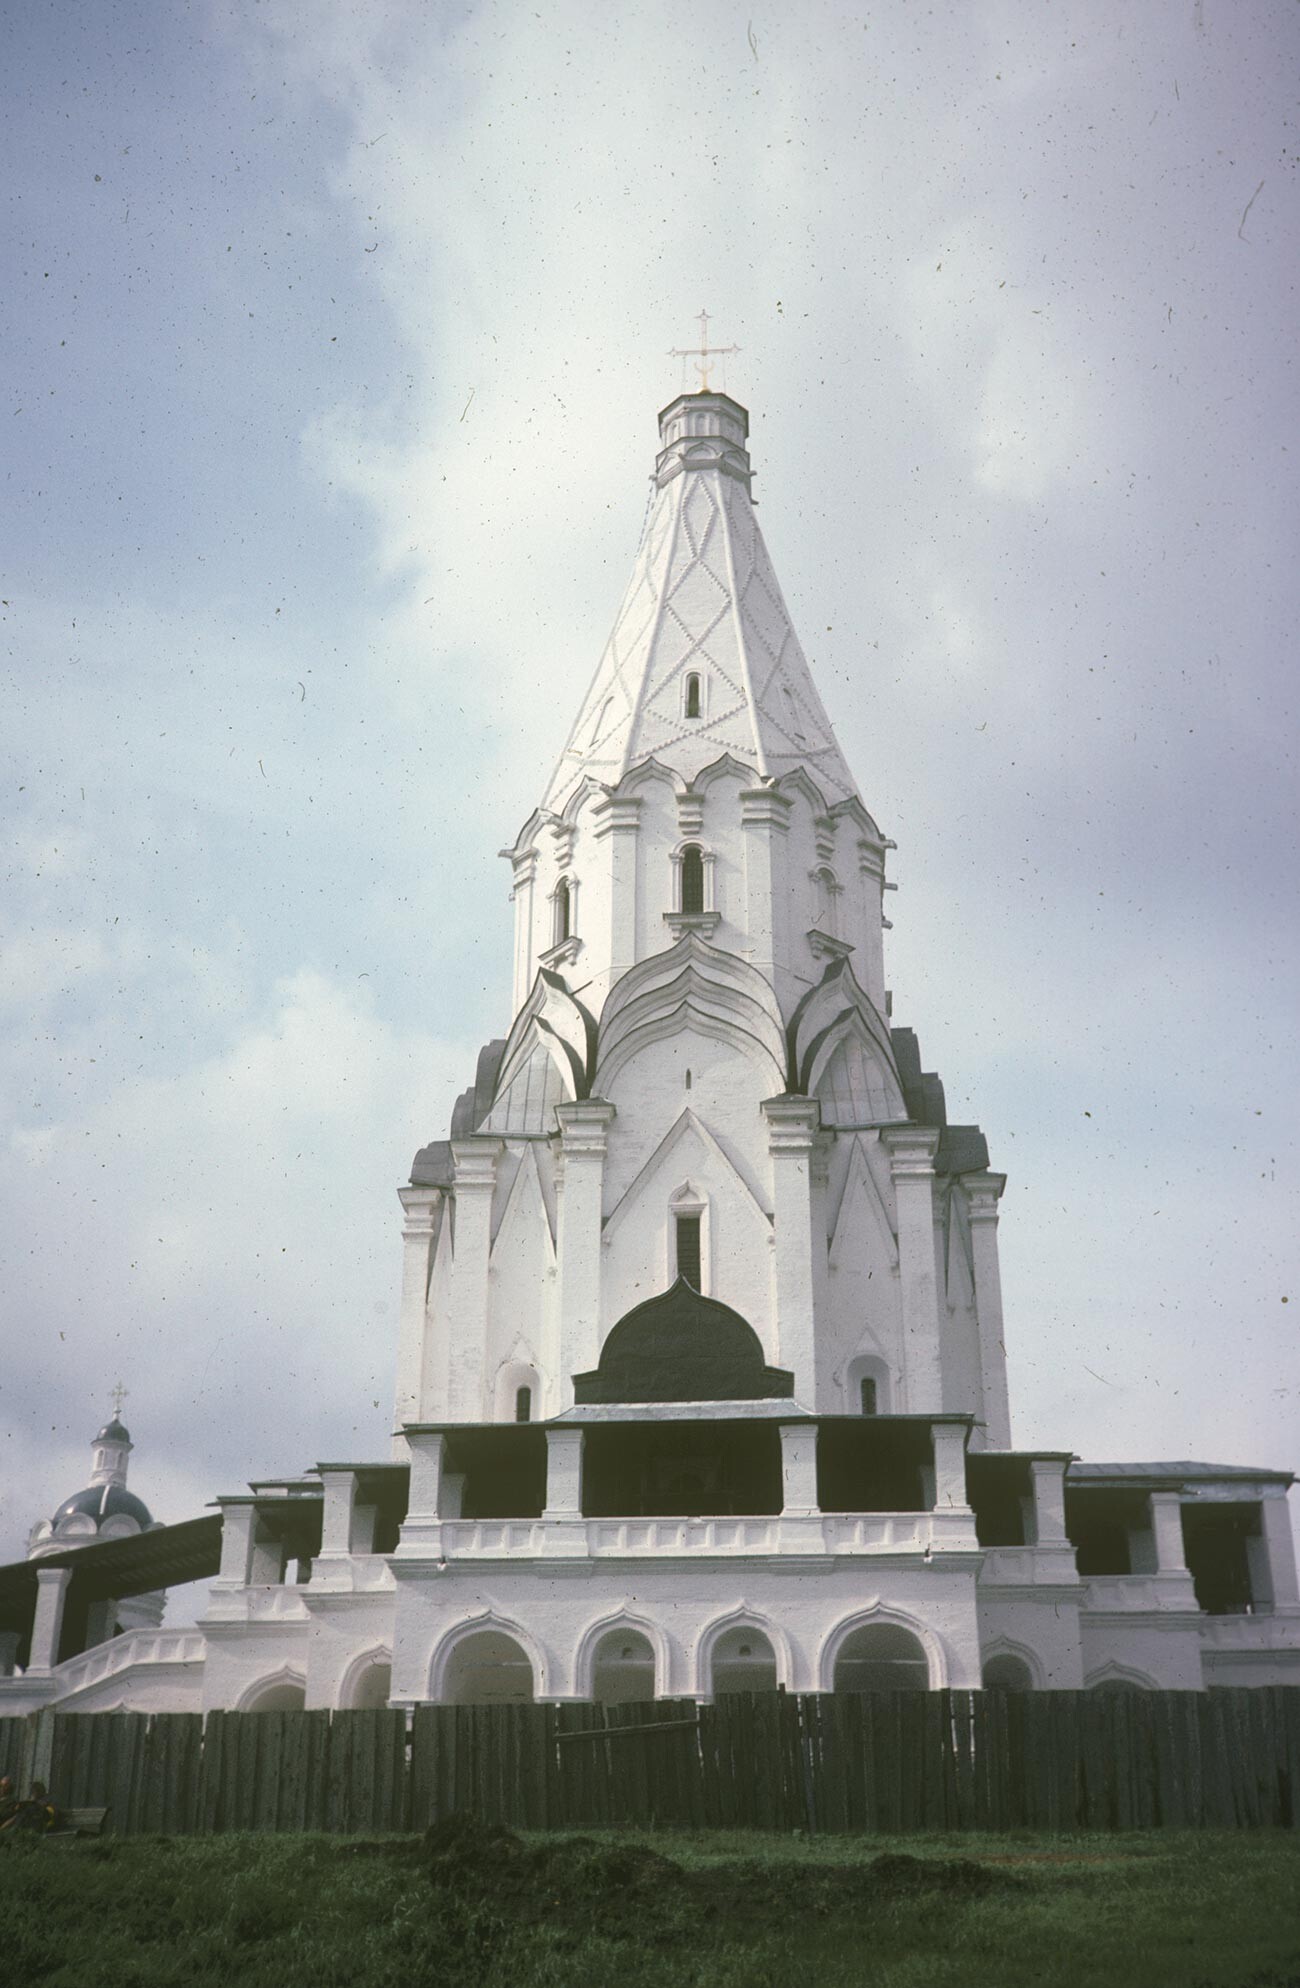 Church of the Ascension. East view taken after whitewashing of church before 1980 Olympics. September 16, 1979